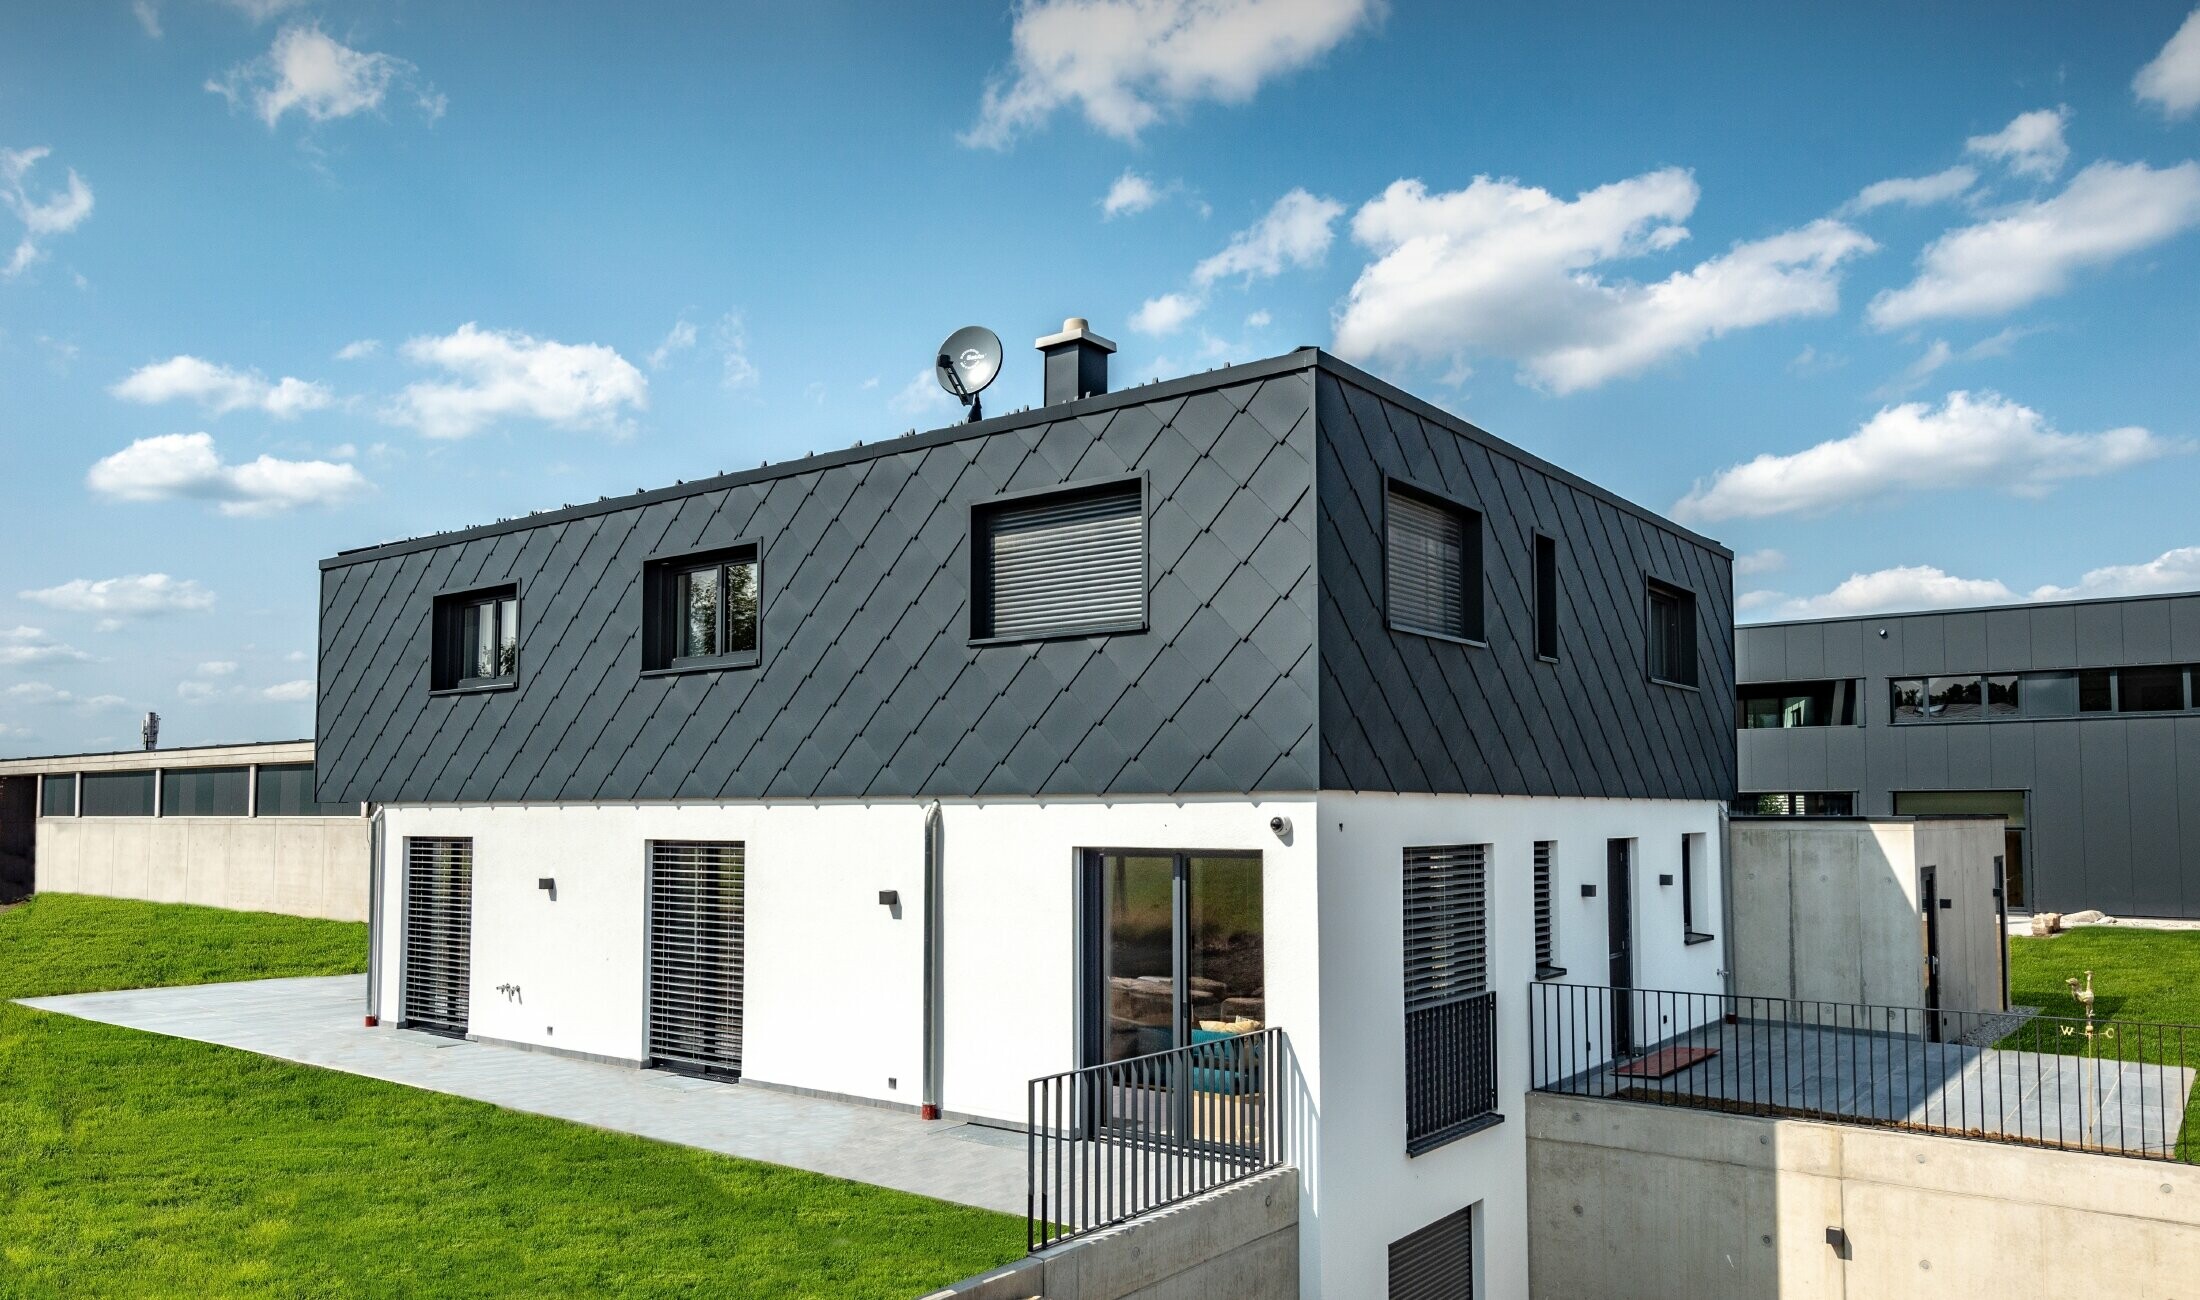 Modest new build with flat roof; the ground floor has a white plaster finish while the upper floor is clad in the large PREFA rhomboid façade tile in anthracite.